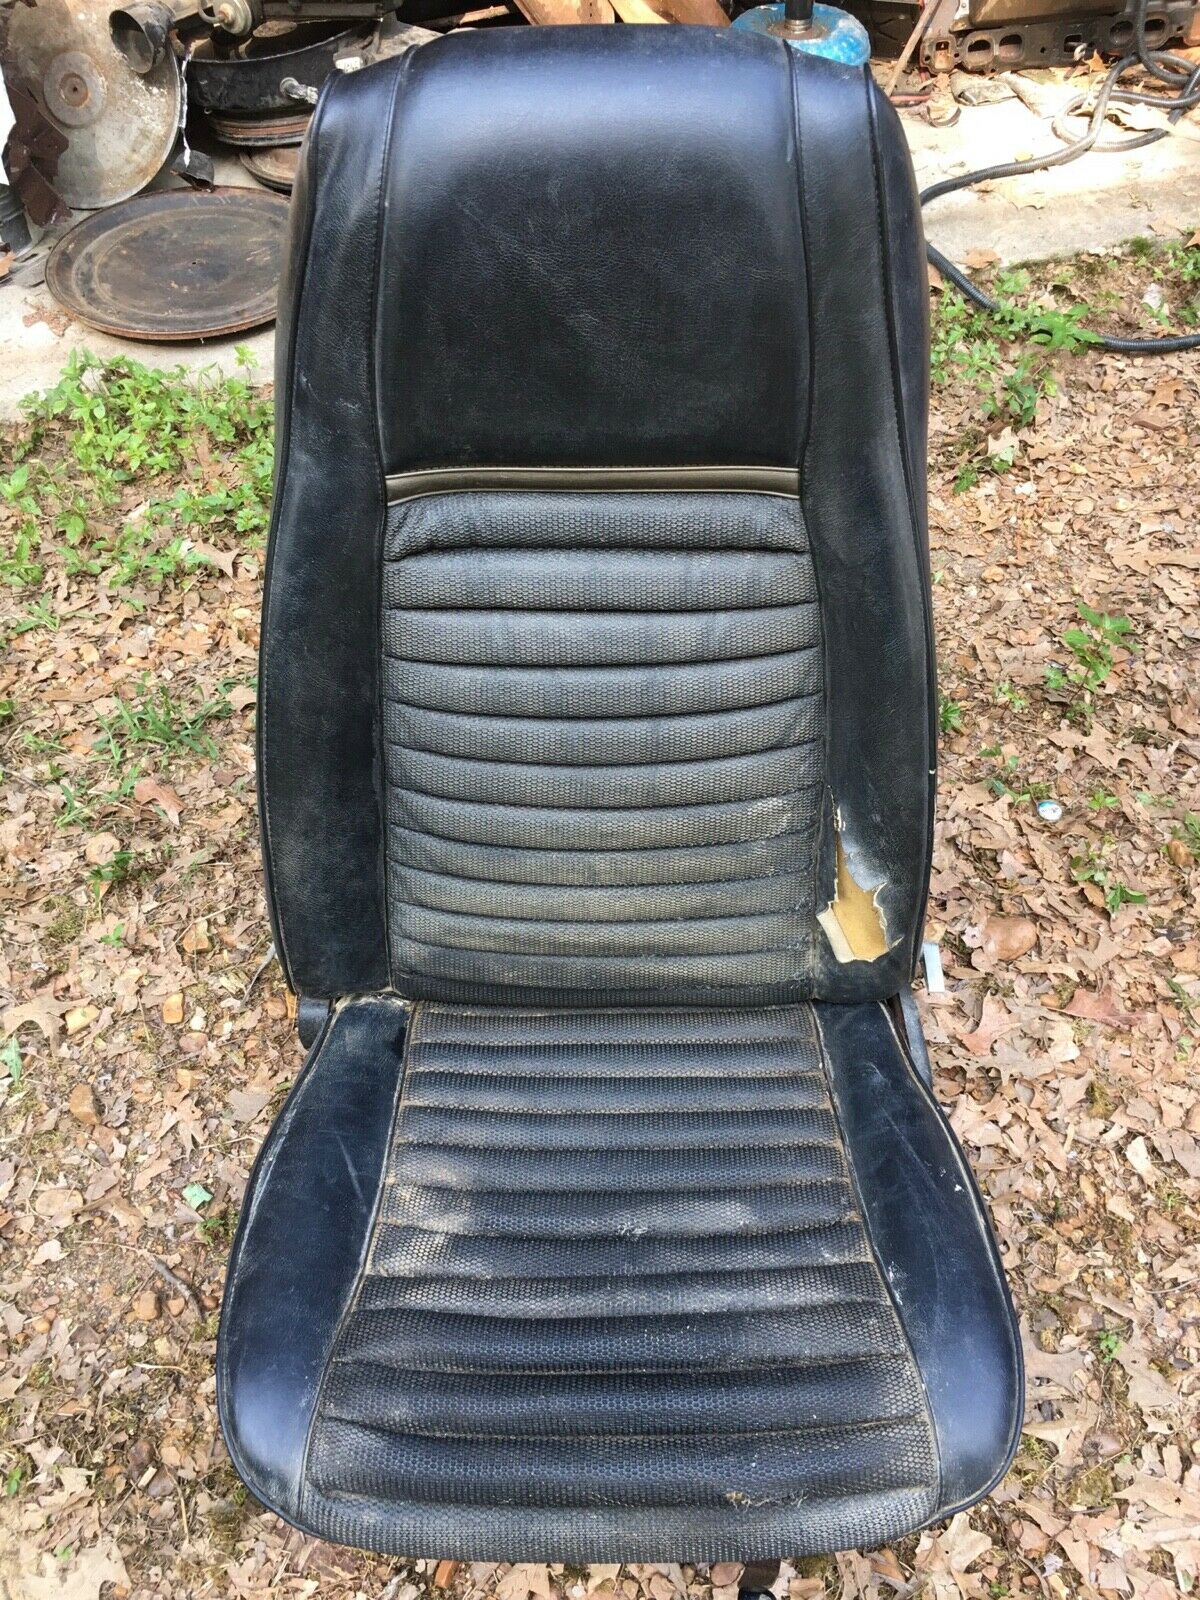 71 72 73 Fomoco Mustang Cougar Left Driver High Back Bucket Seat With Tracks Oem